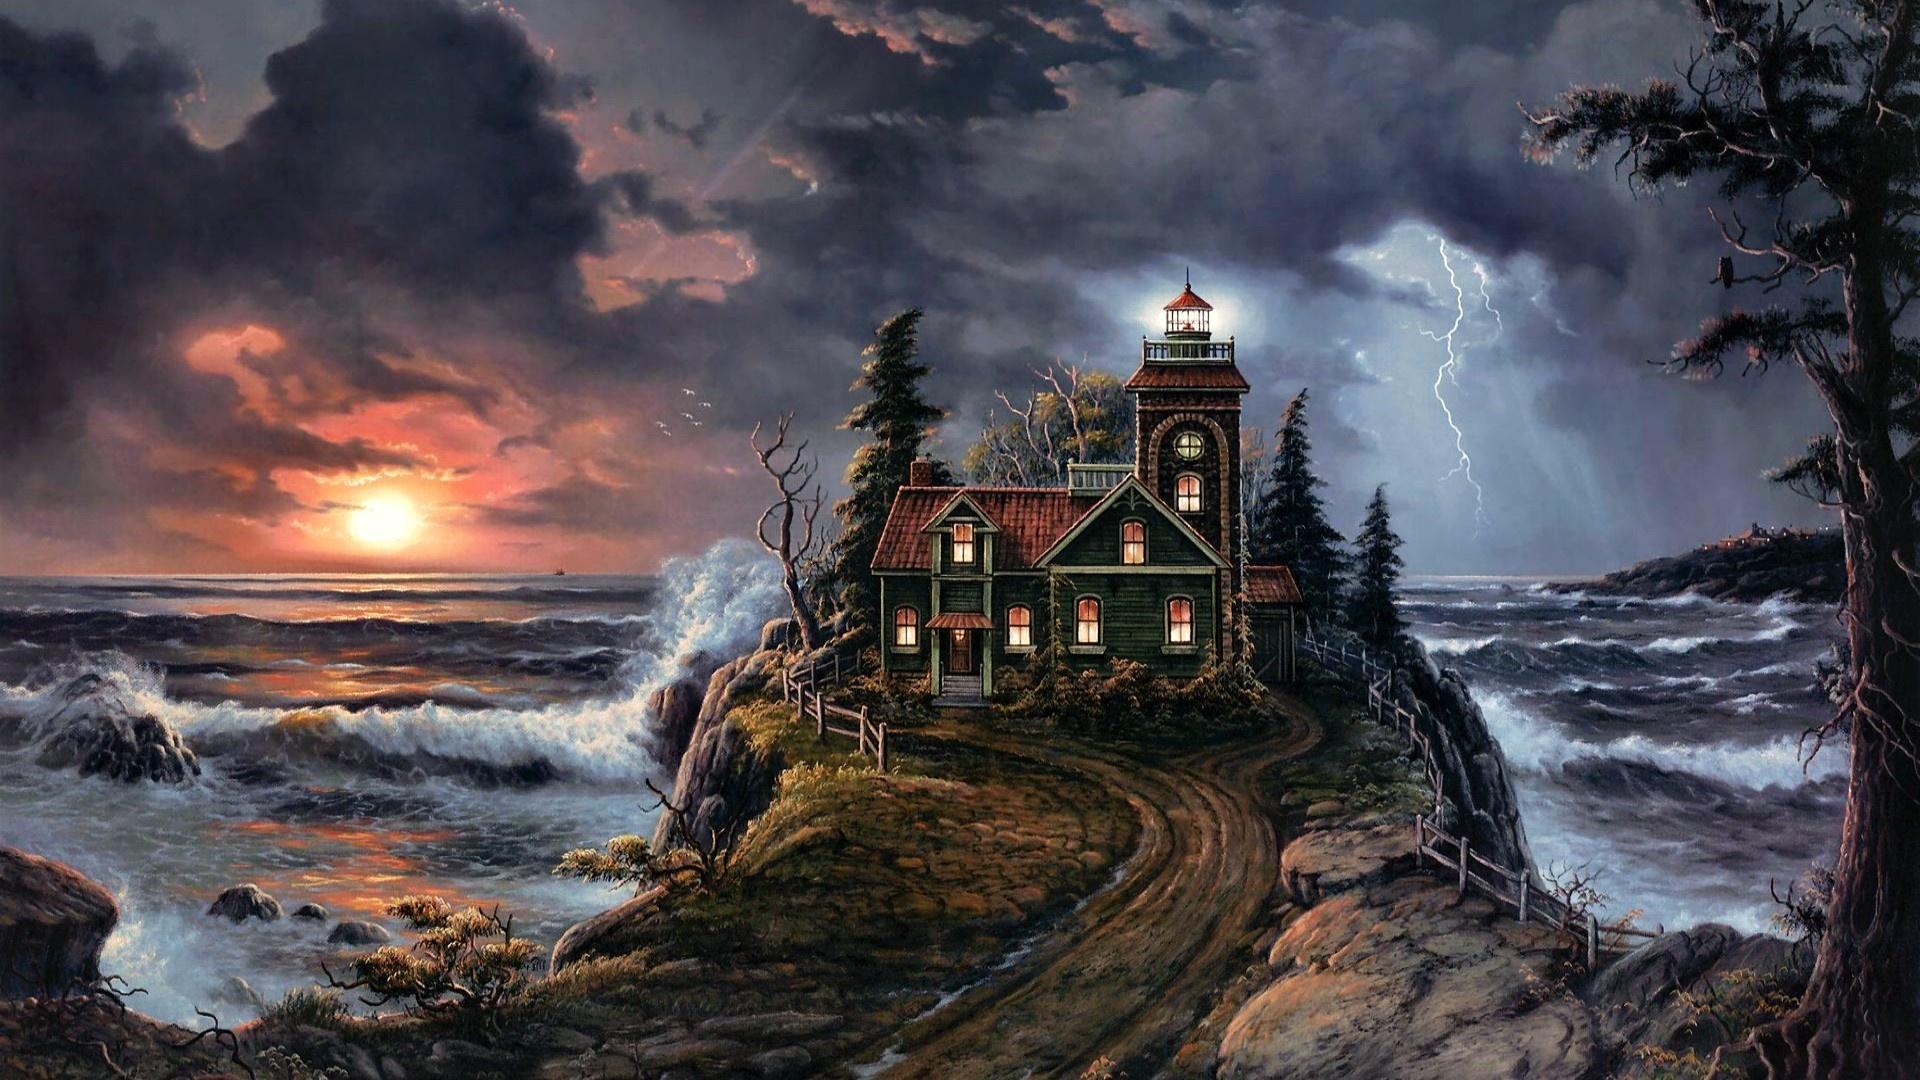 Stormy Lighthouse Oil Painting wallpaper